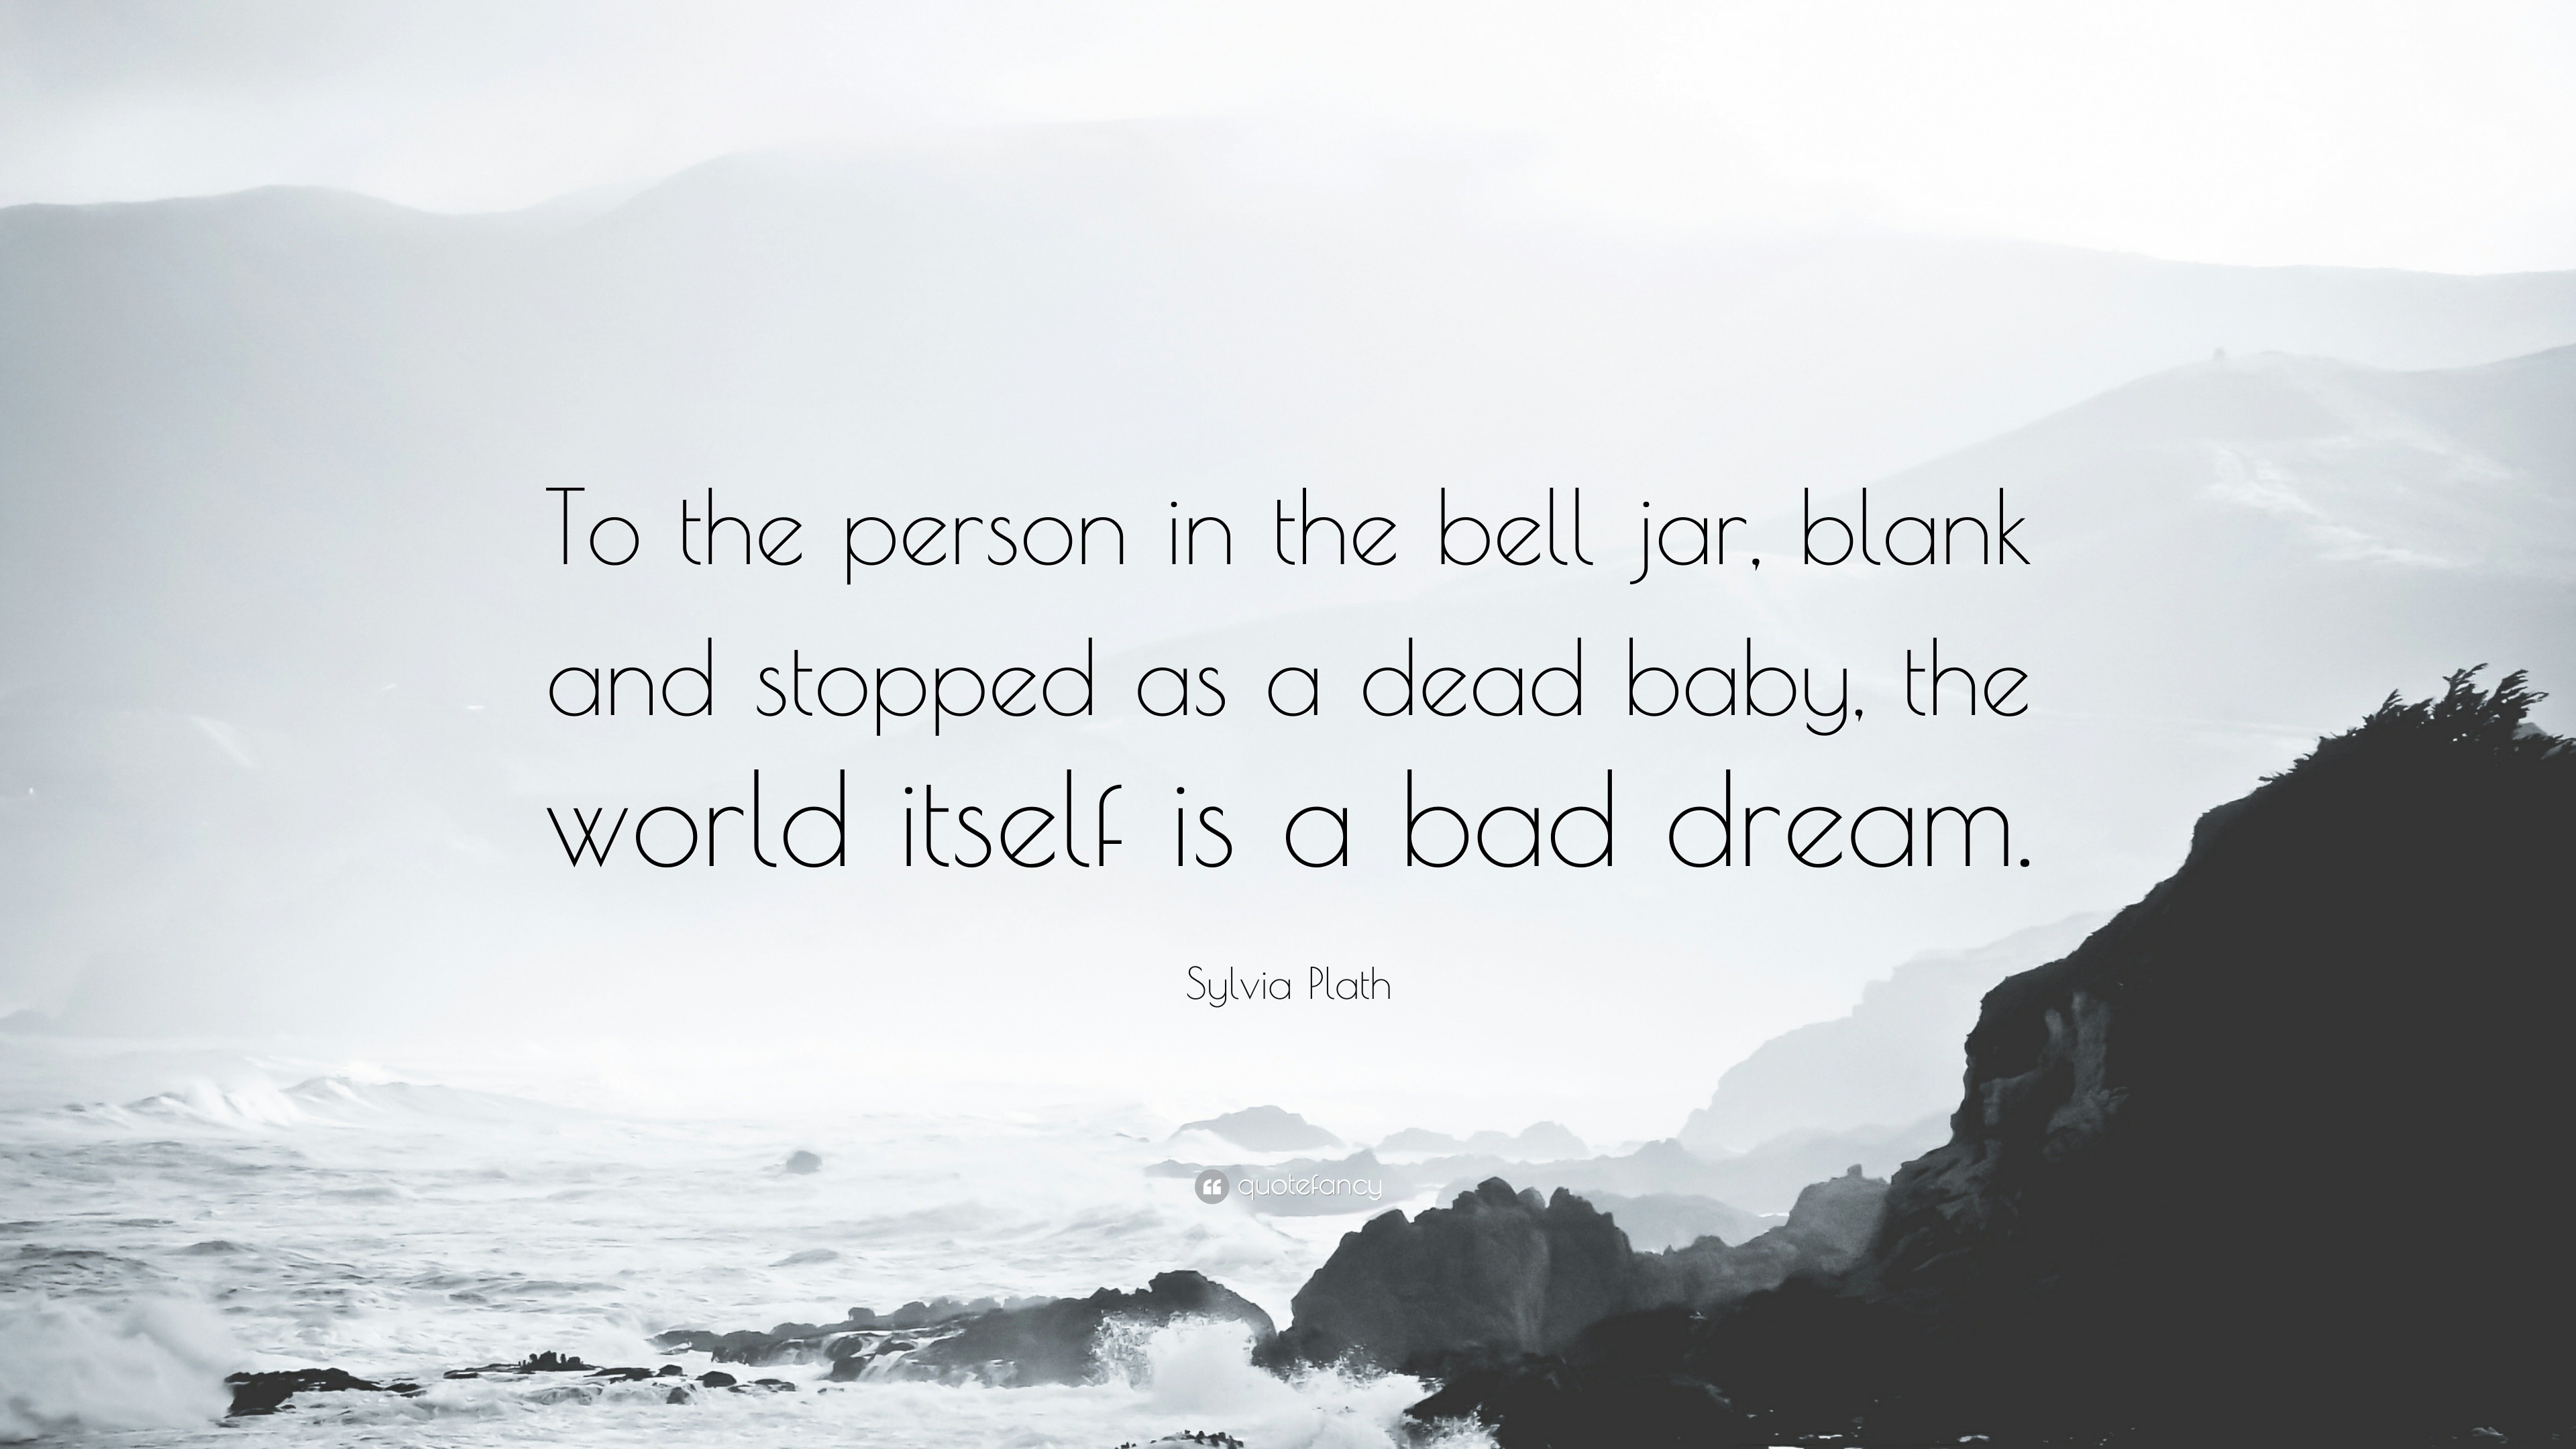 Sylvia Plath Quote: “To the person in the bell jar, blank and